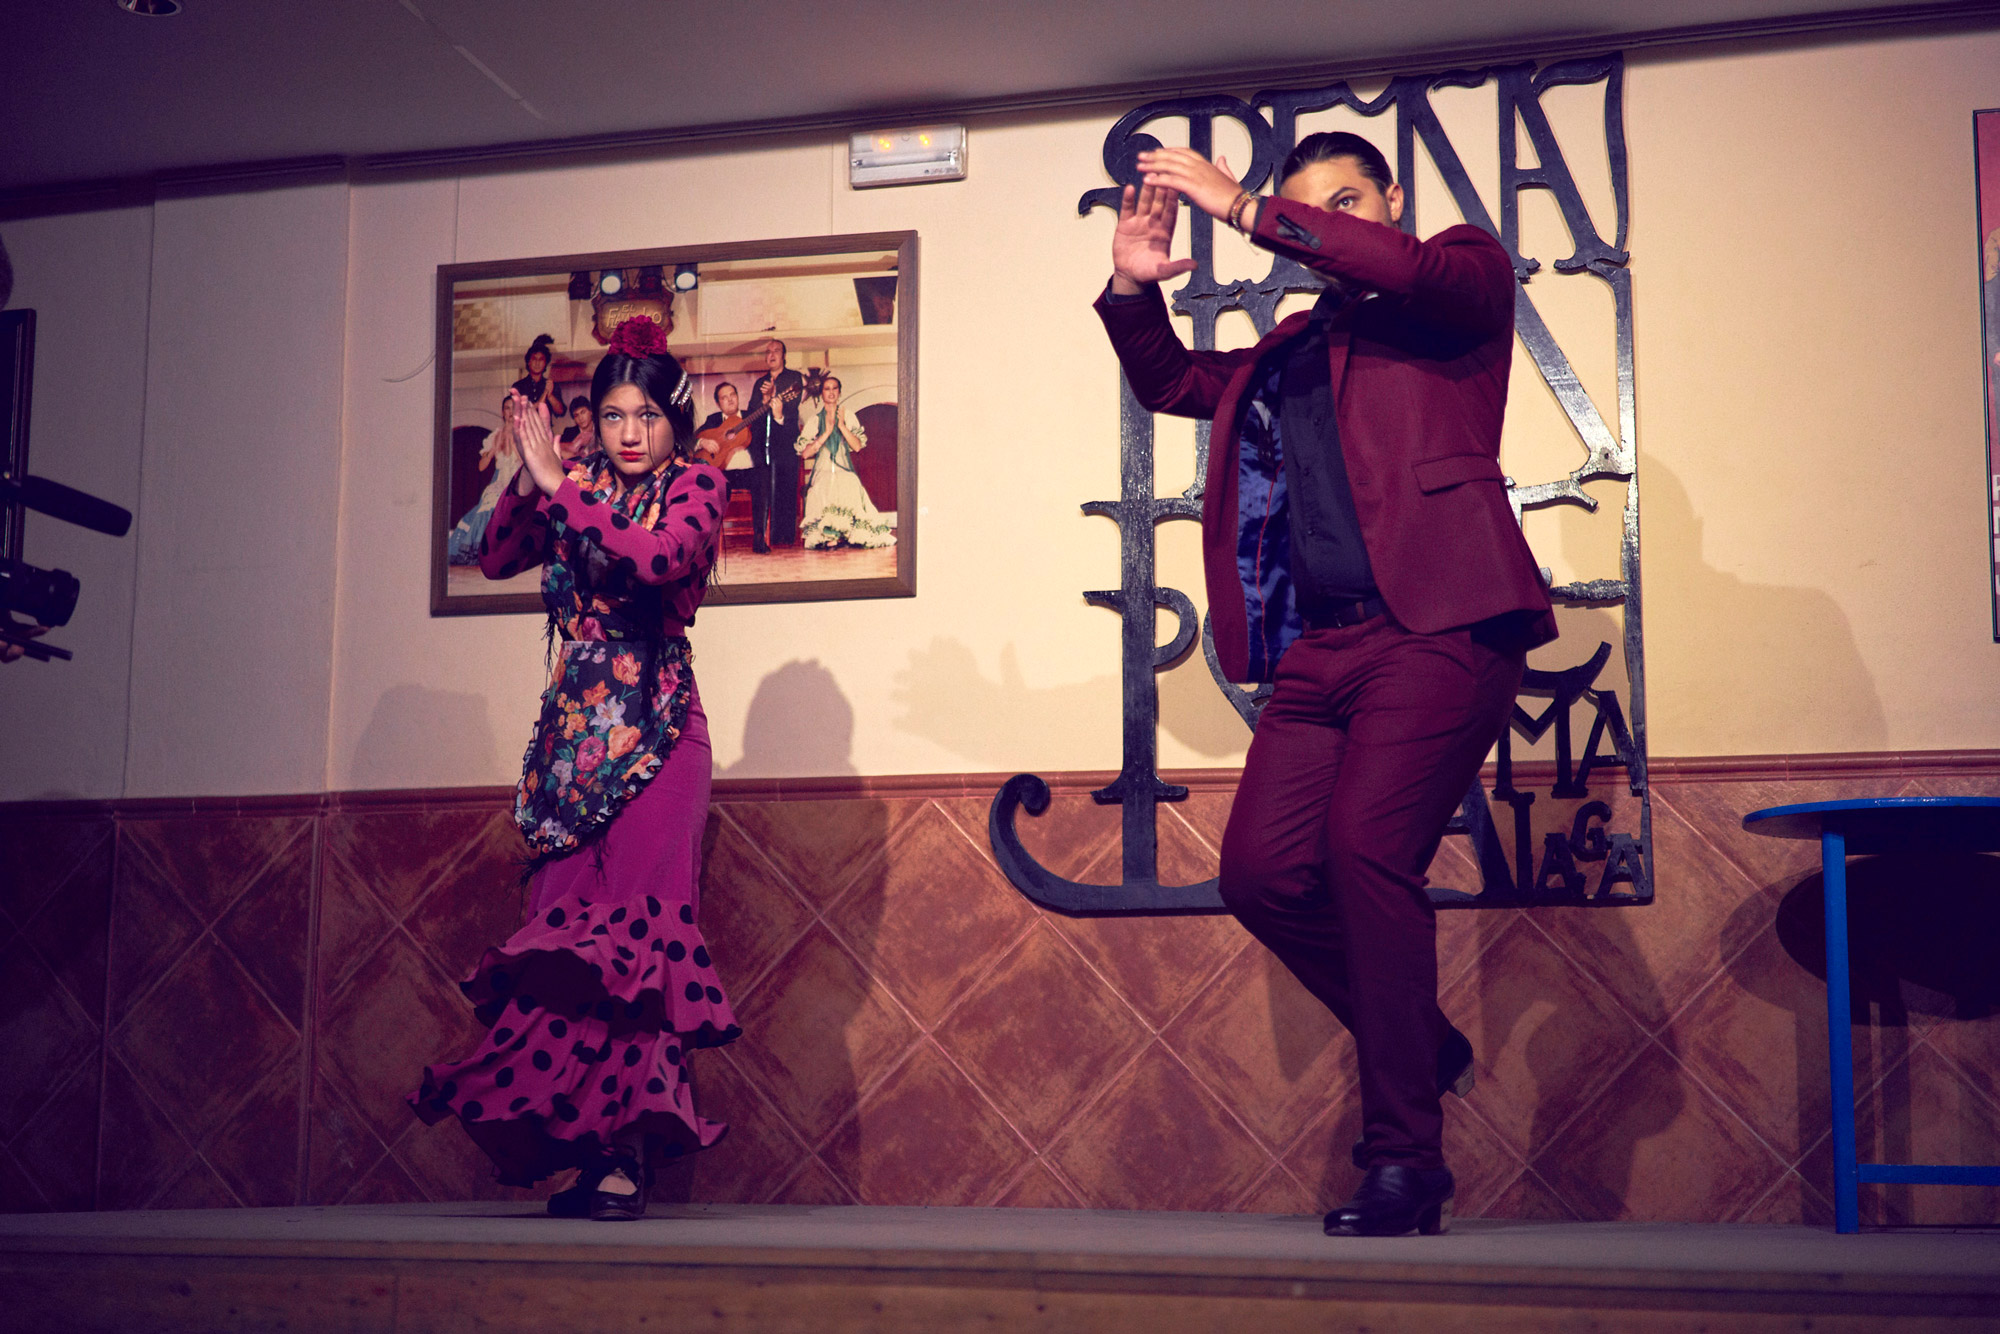 Flamenco dancers in traditional clothing dancing on a stage